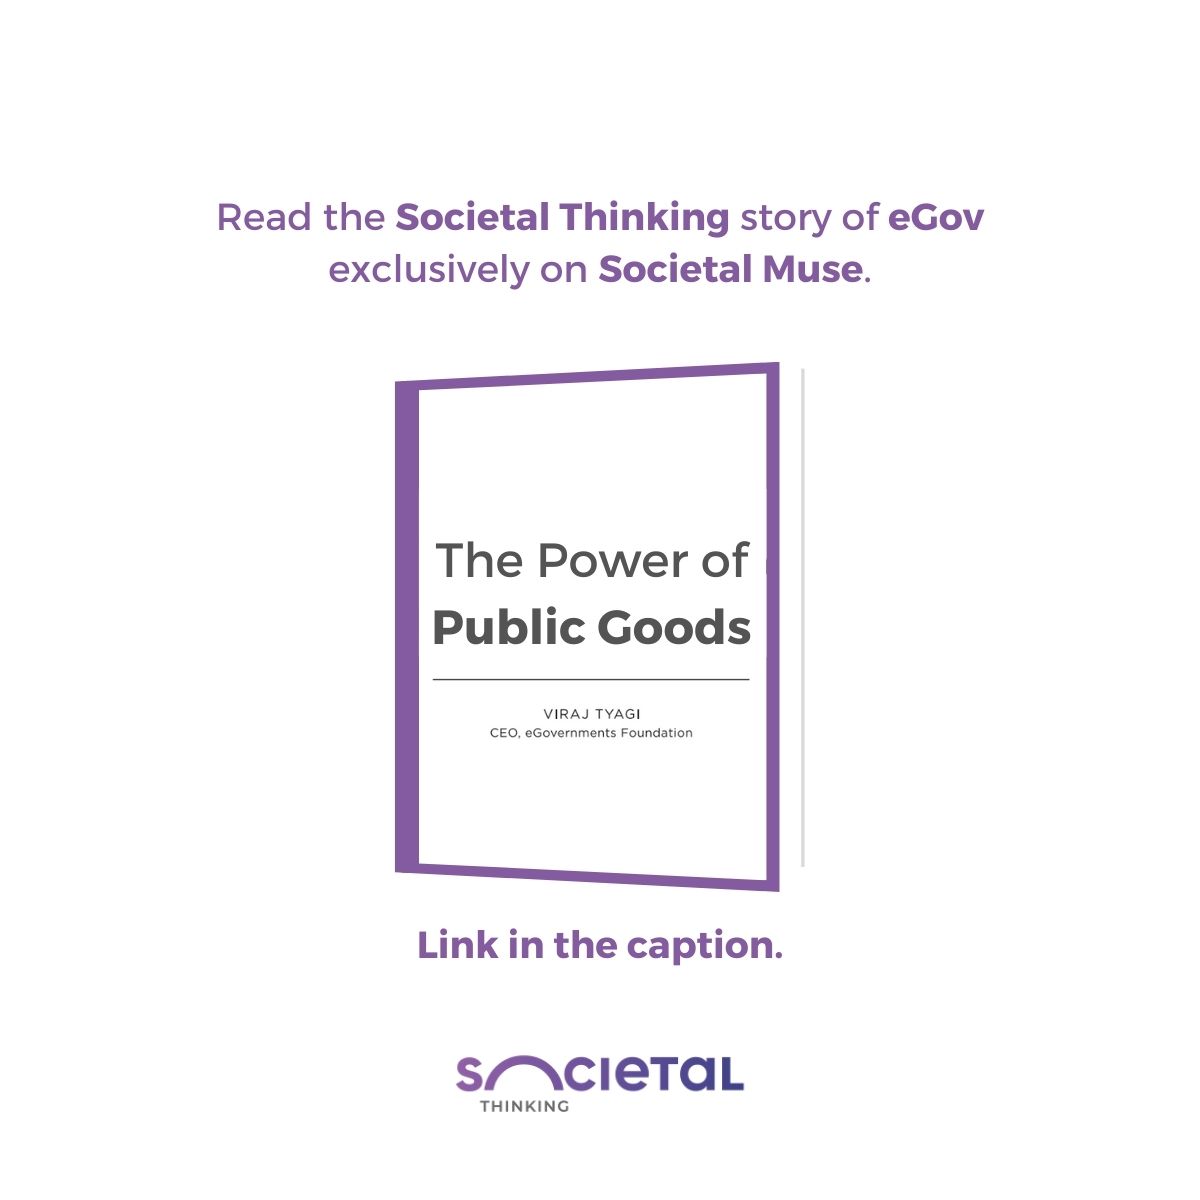 Read the Societal Thinking story of eGov Foundation exclusively on Societal Muse:
bit.ly/smtegov

#societalmuse #findyourmuse #societalthinking